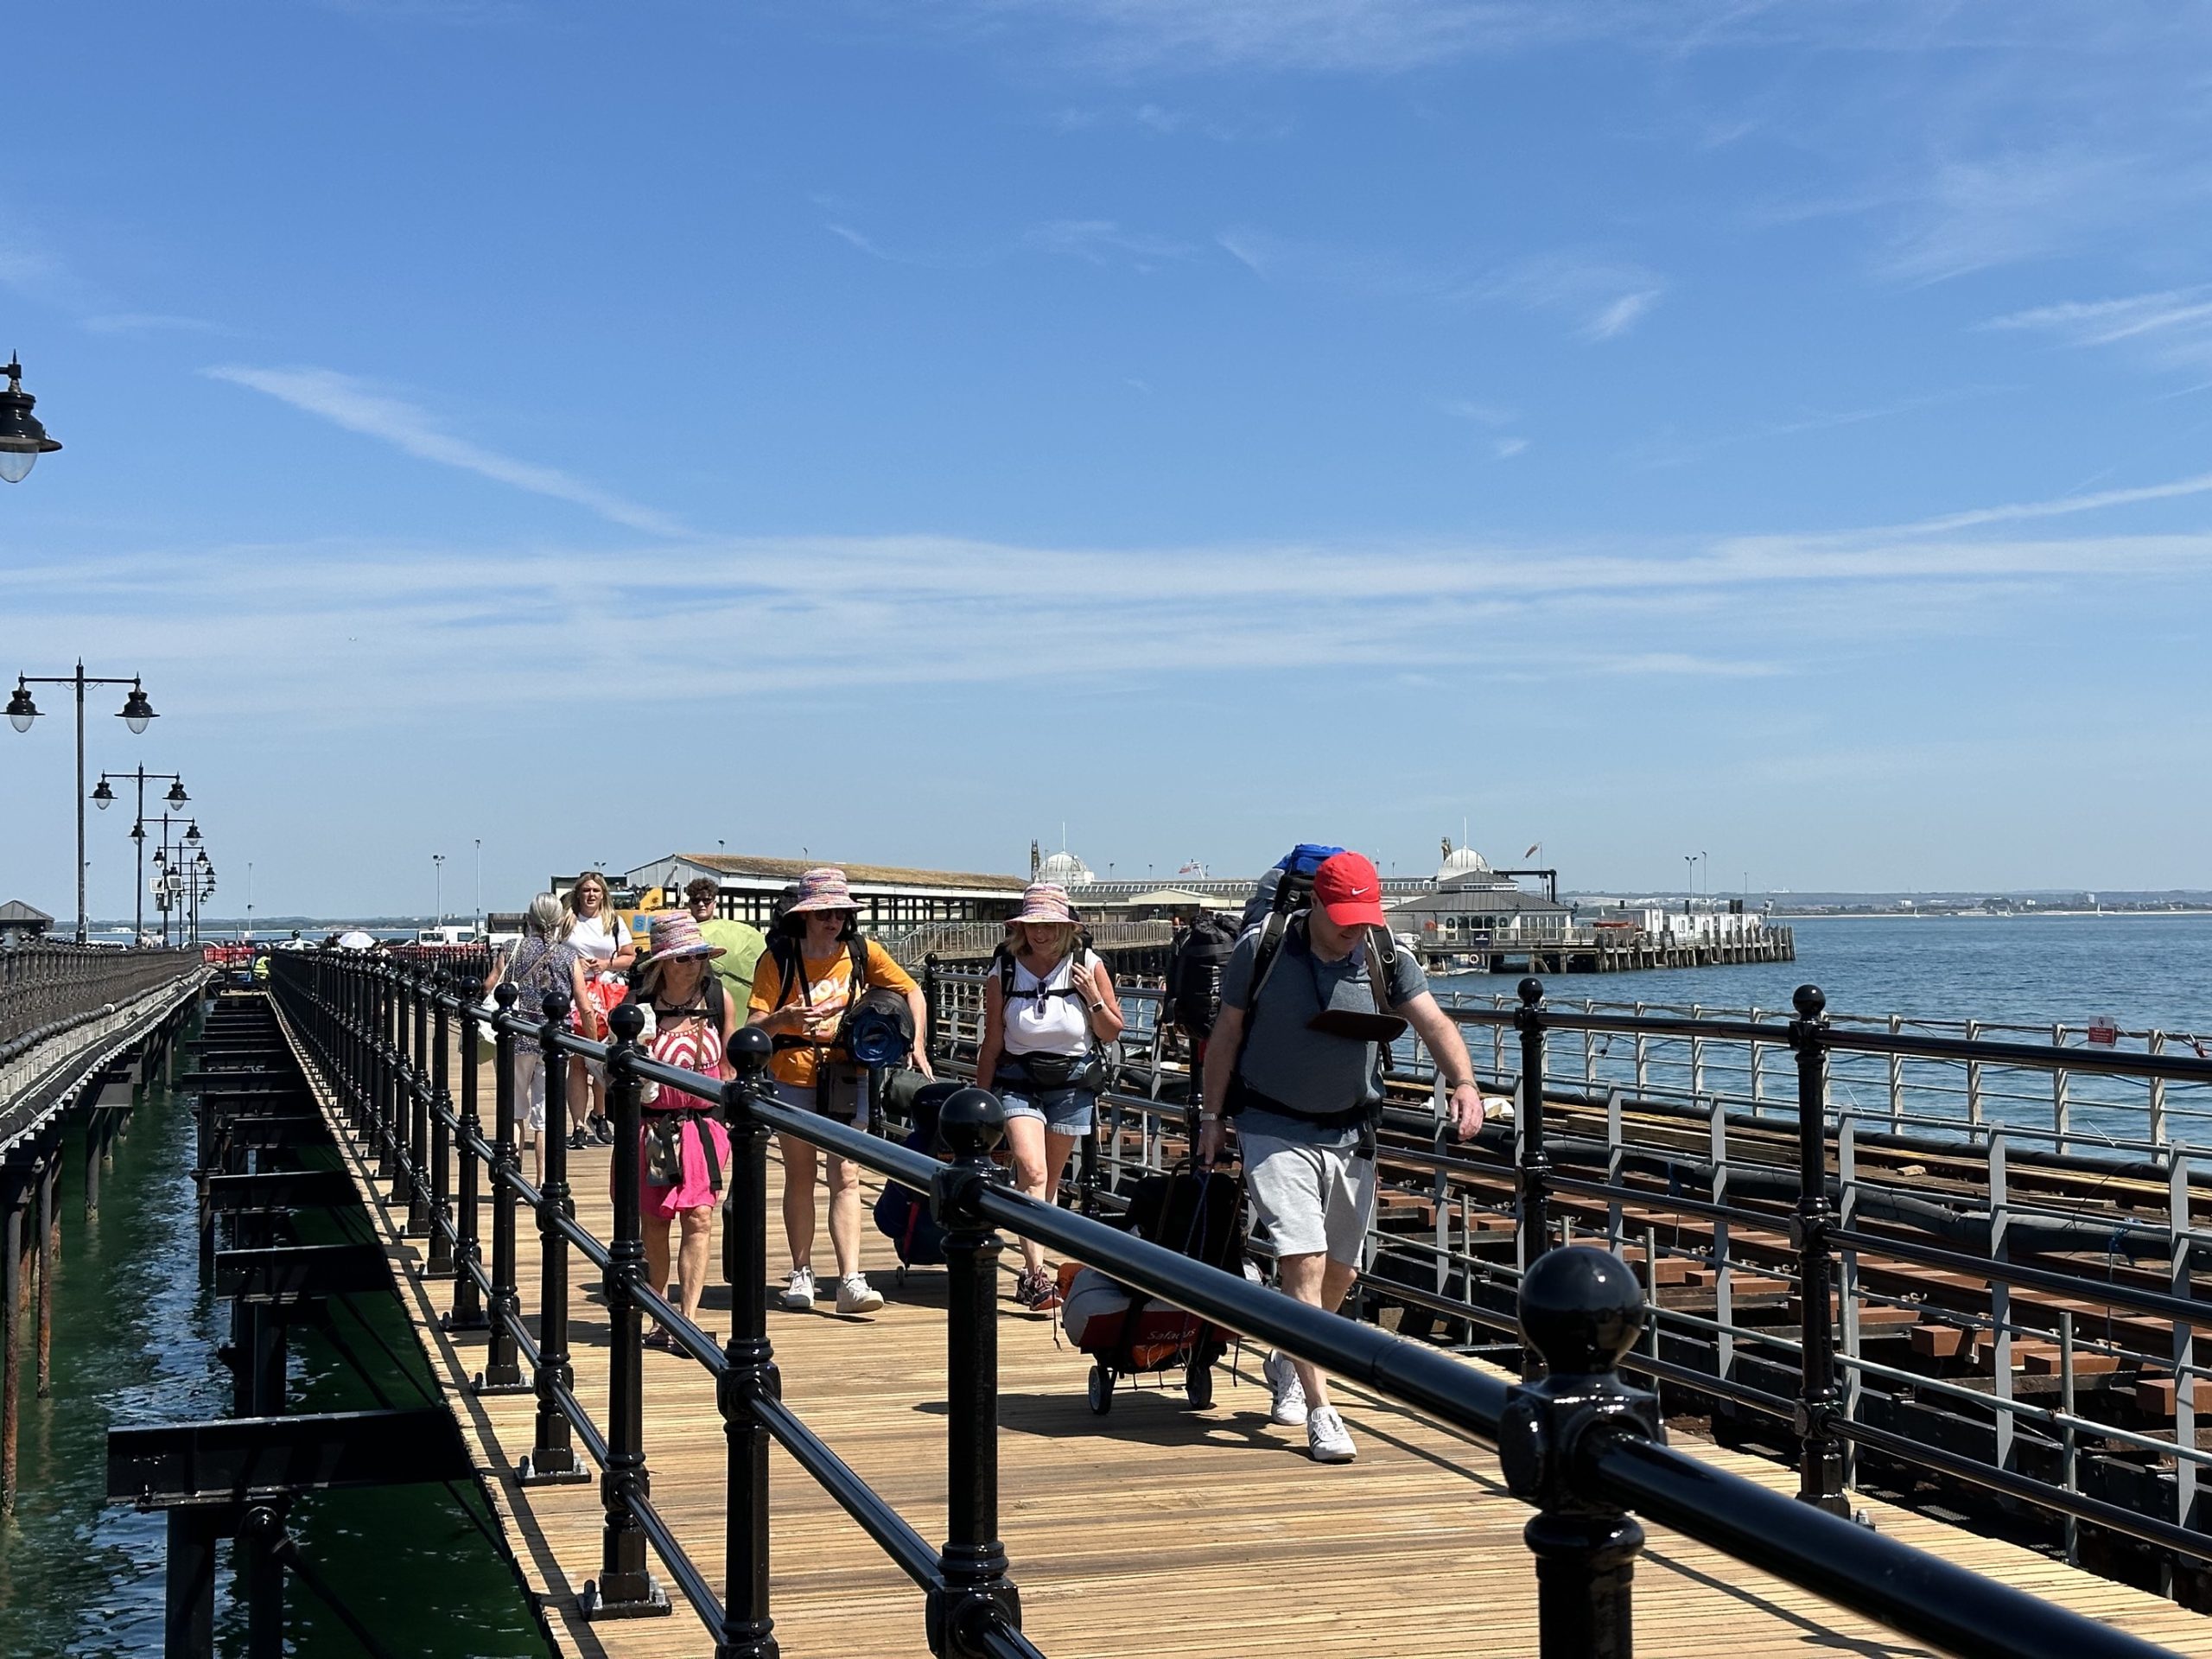 People walking down a pier footway dressed in summer clothes and carrying luggage